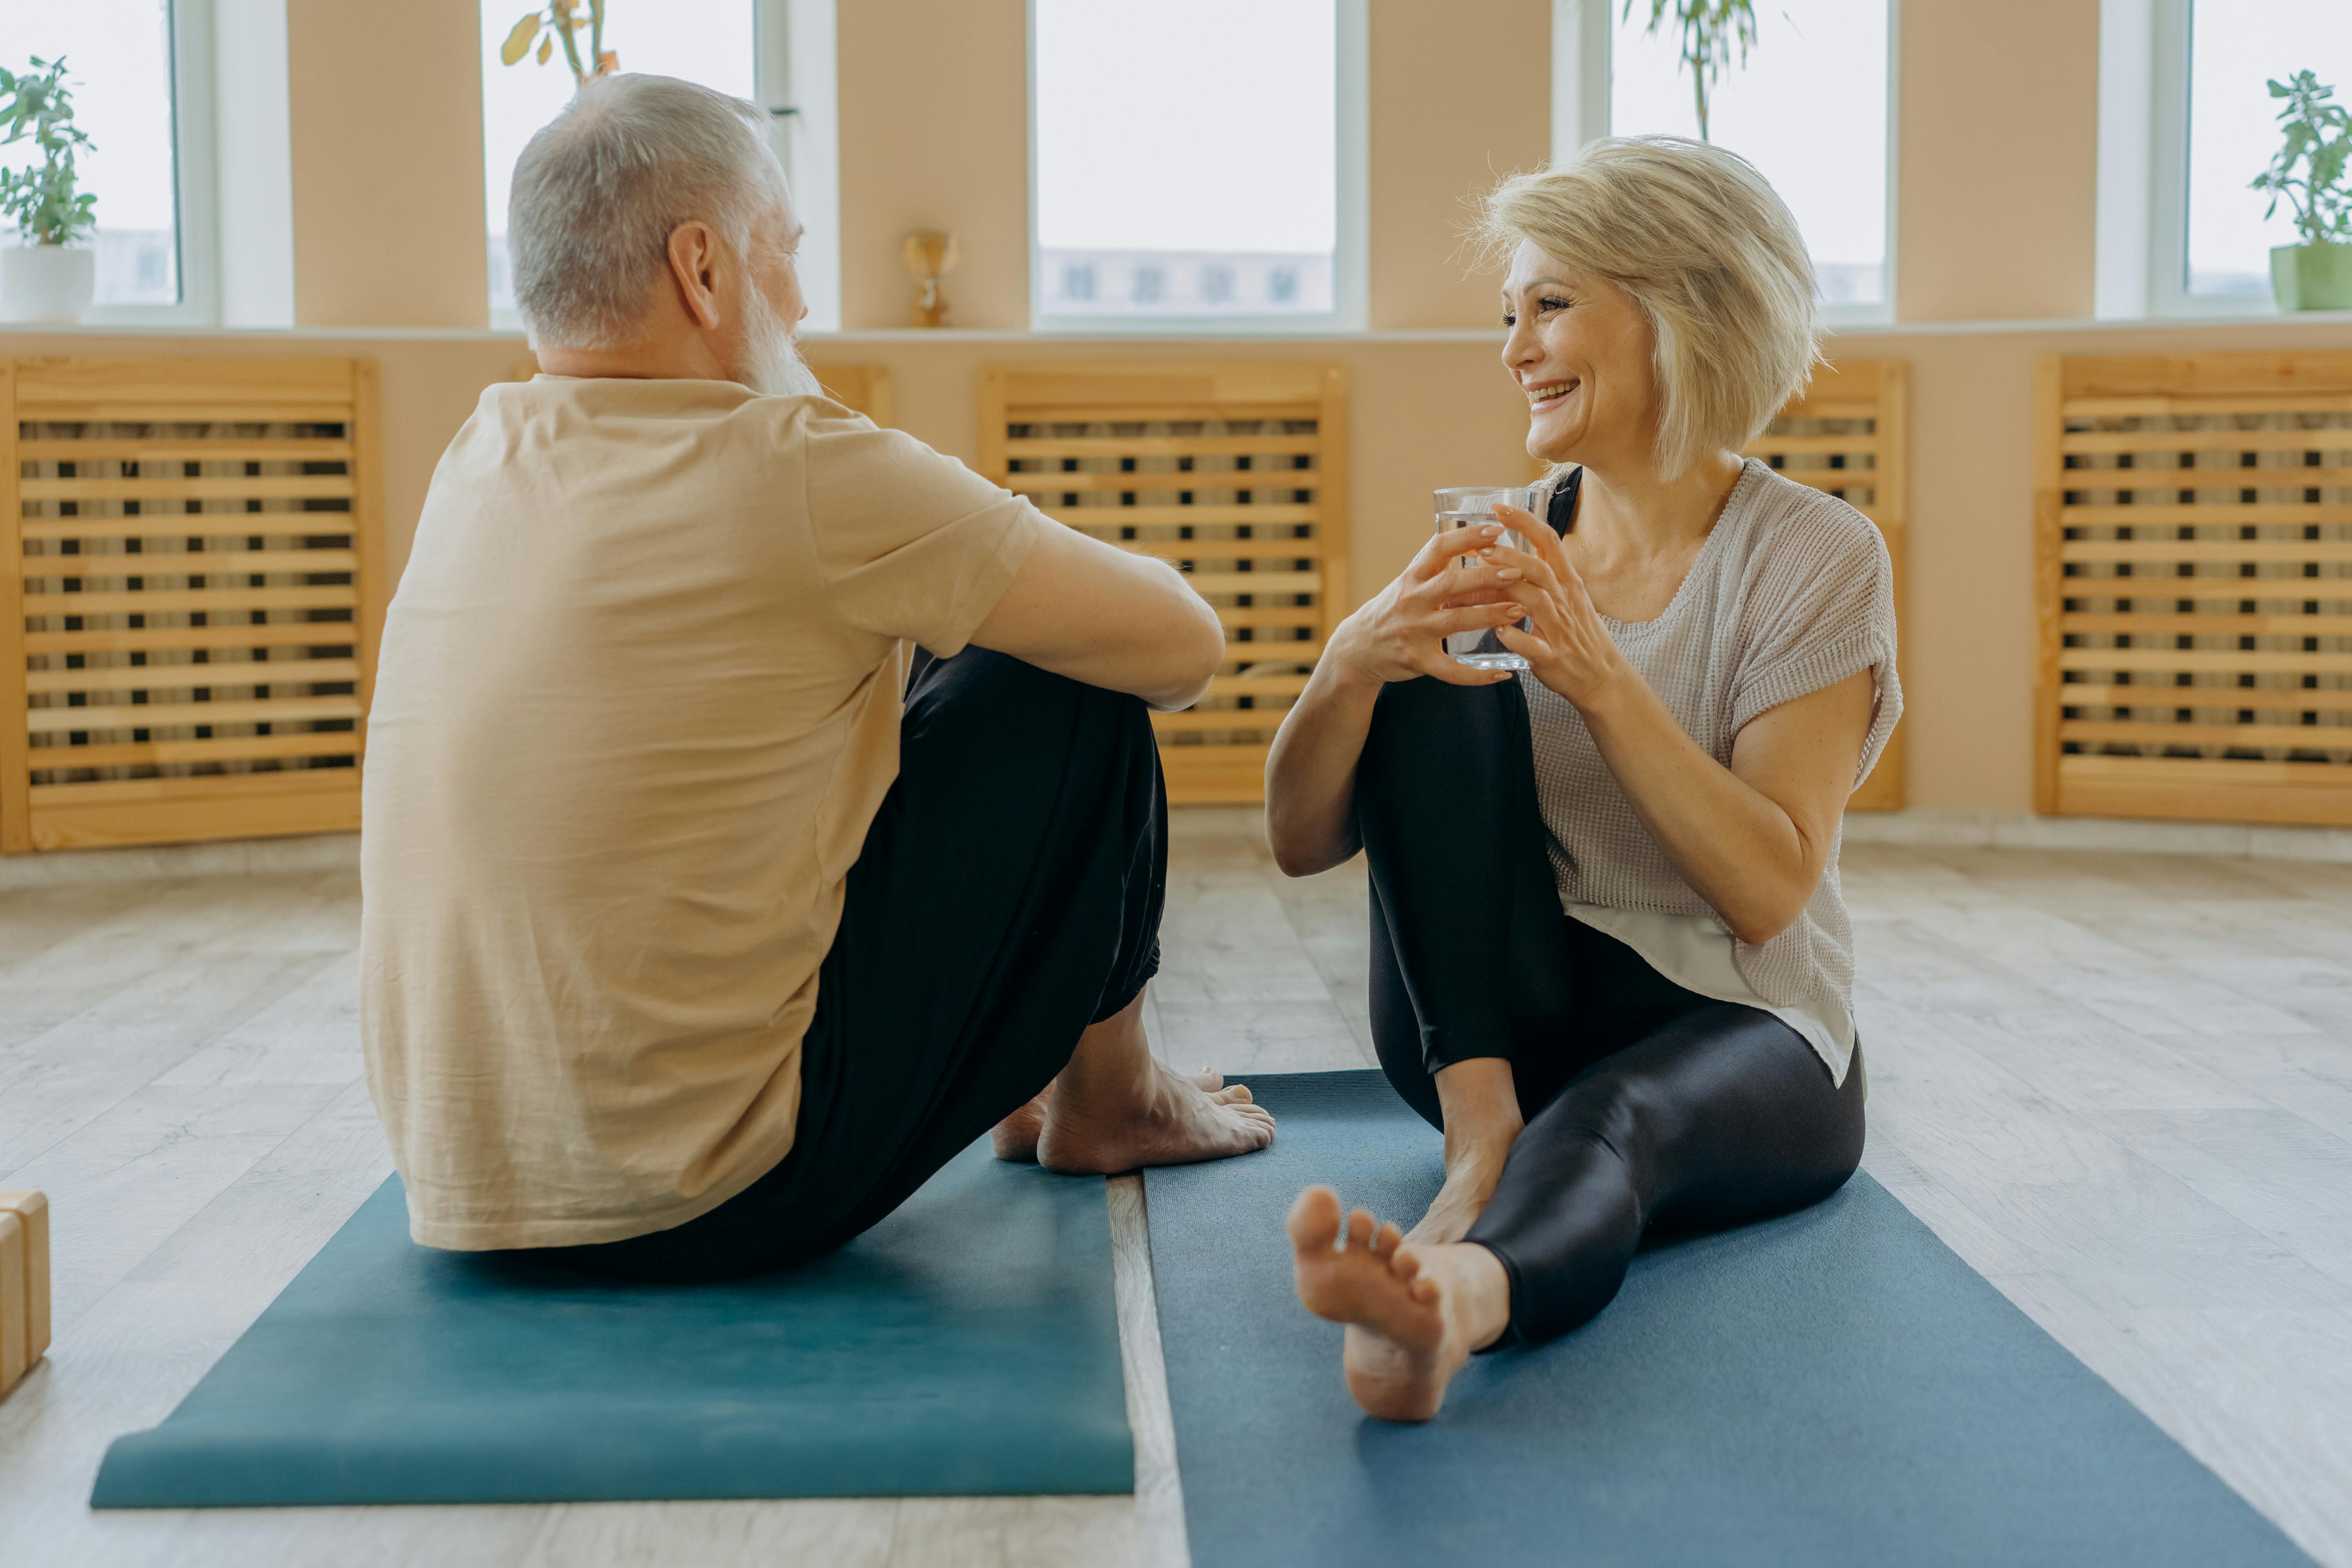 An elderly man and woman having a conversation while siting on a yoga mat | Source: Pexels